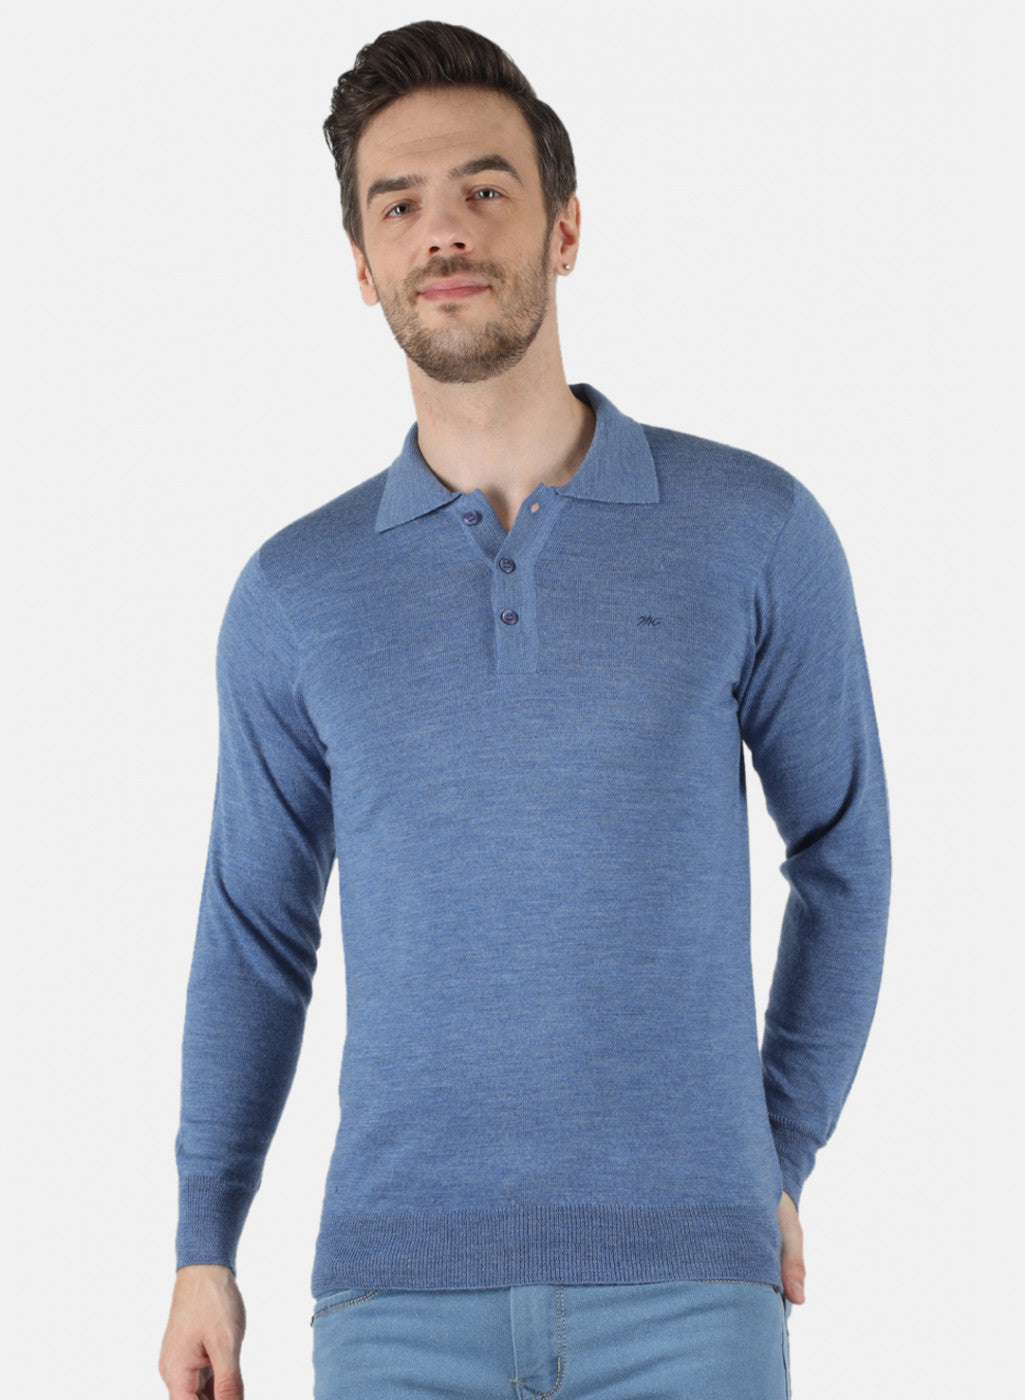 MONTE CARLO Blue Embroidery Shirt